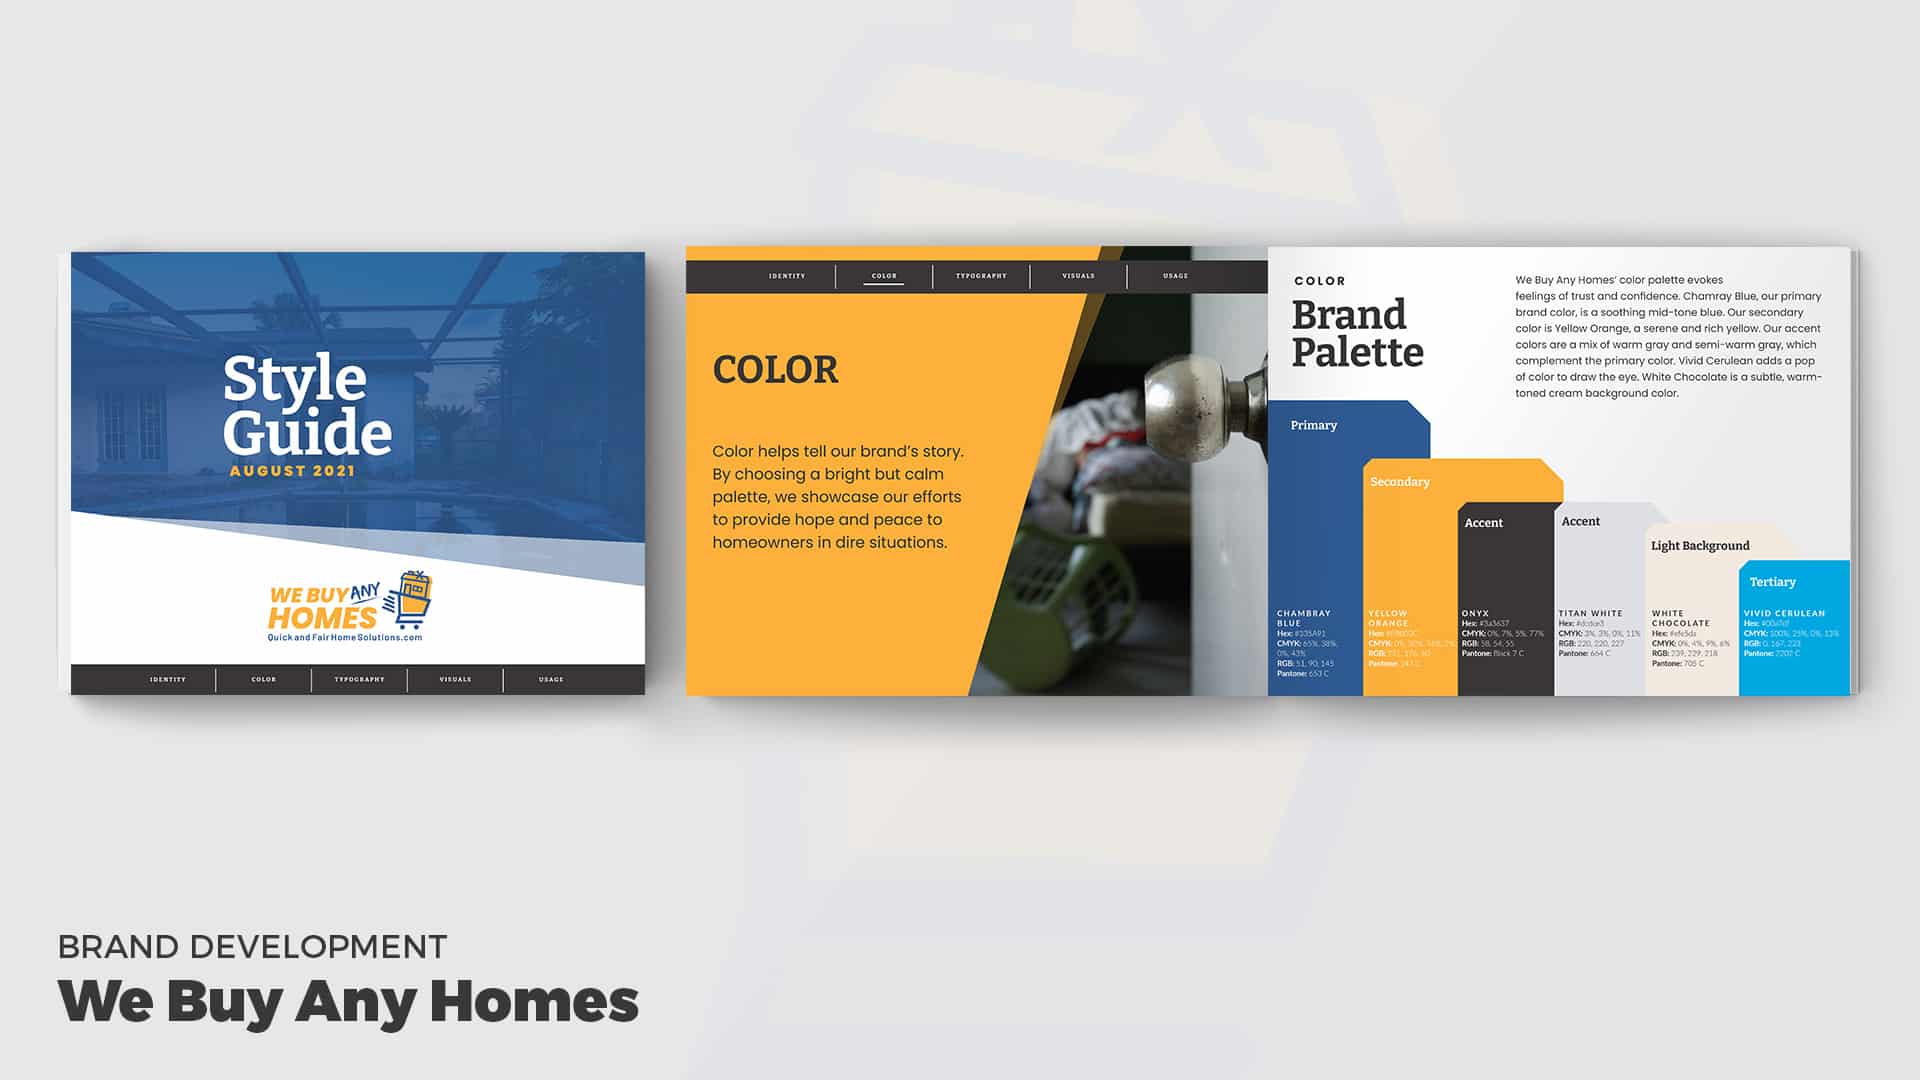 We Buy Any Homes Brand Guide